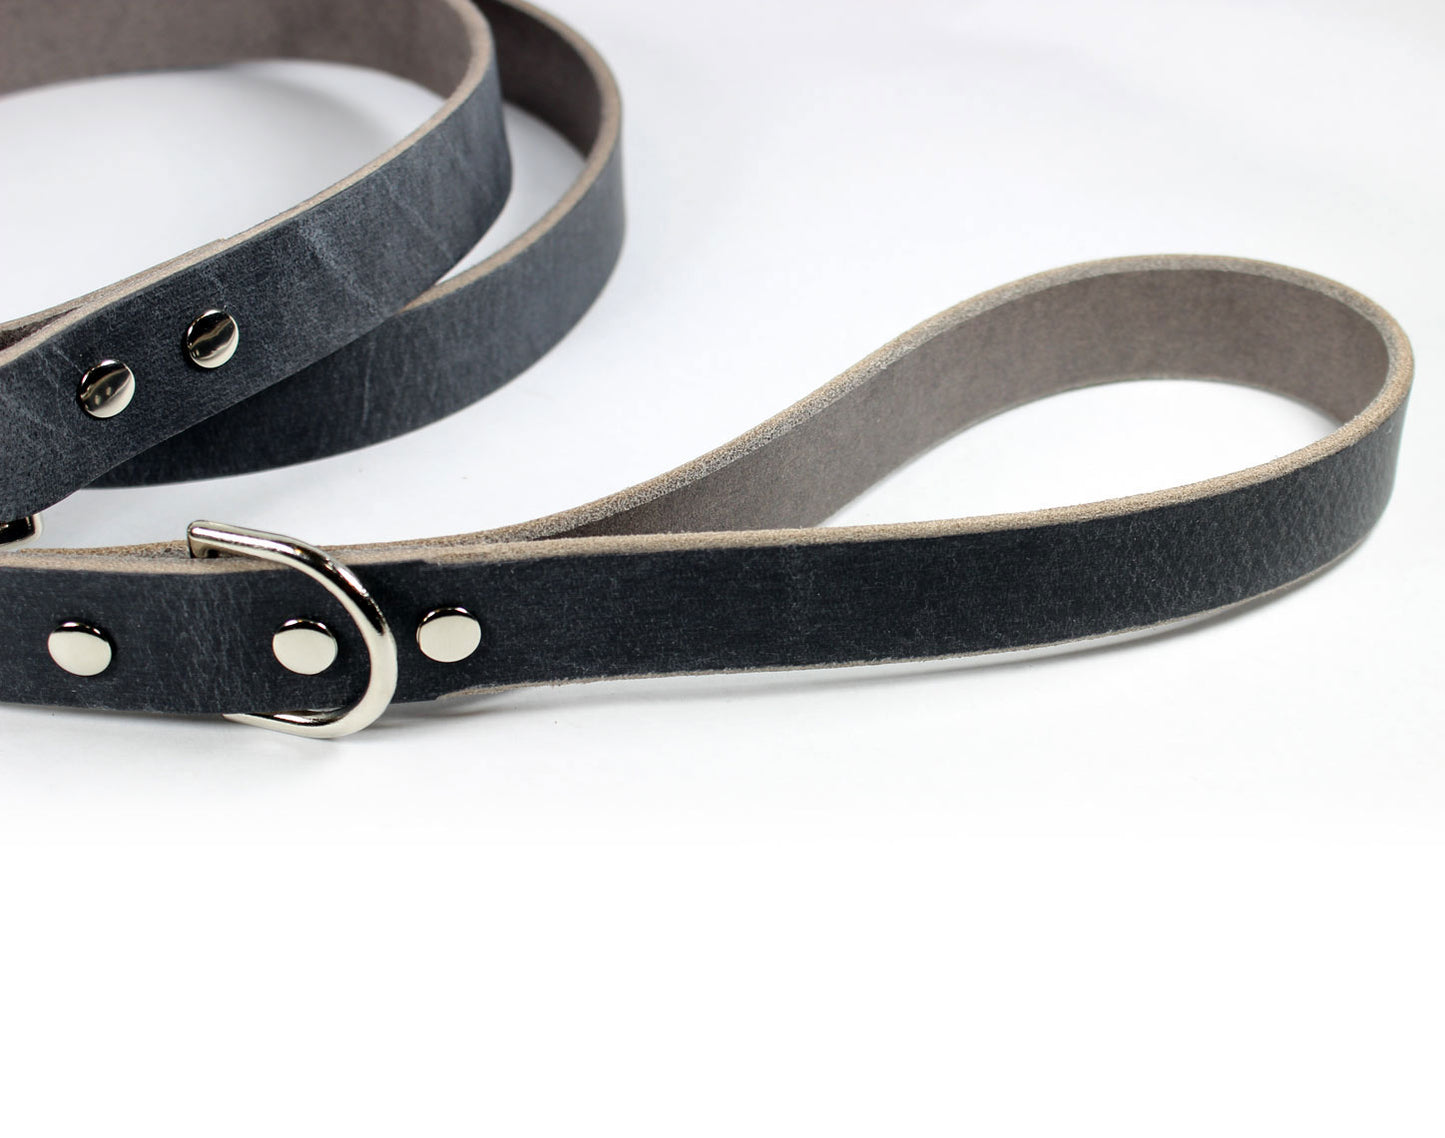 Thick Leather Dog Leash